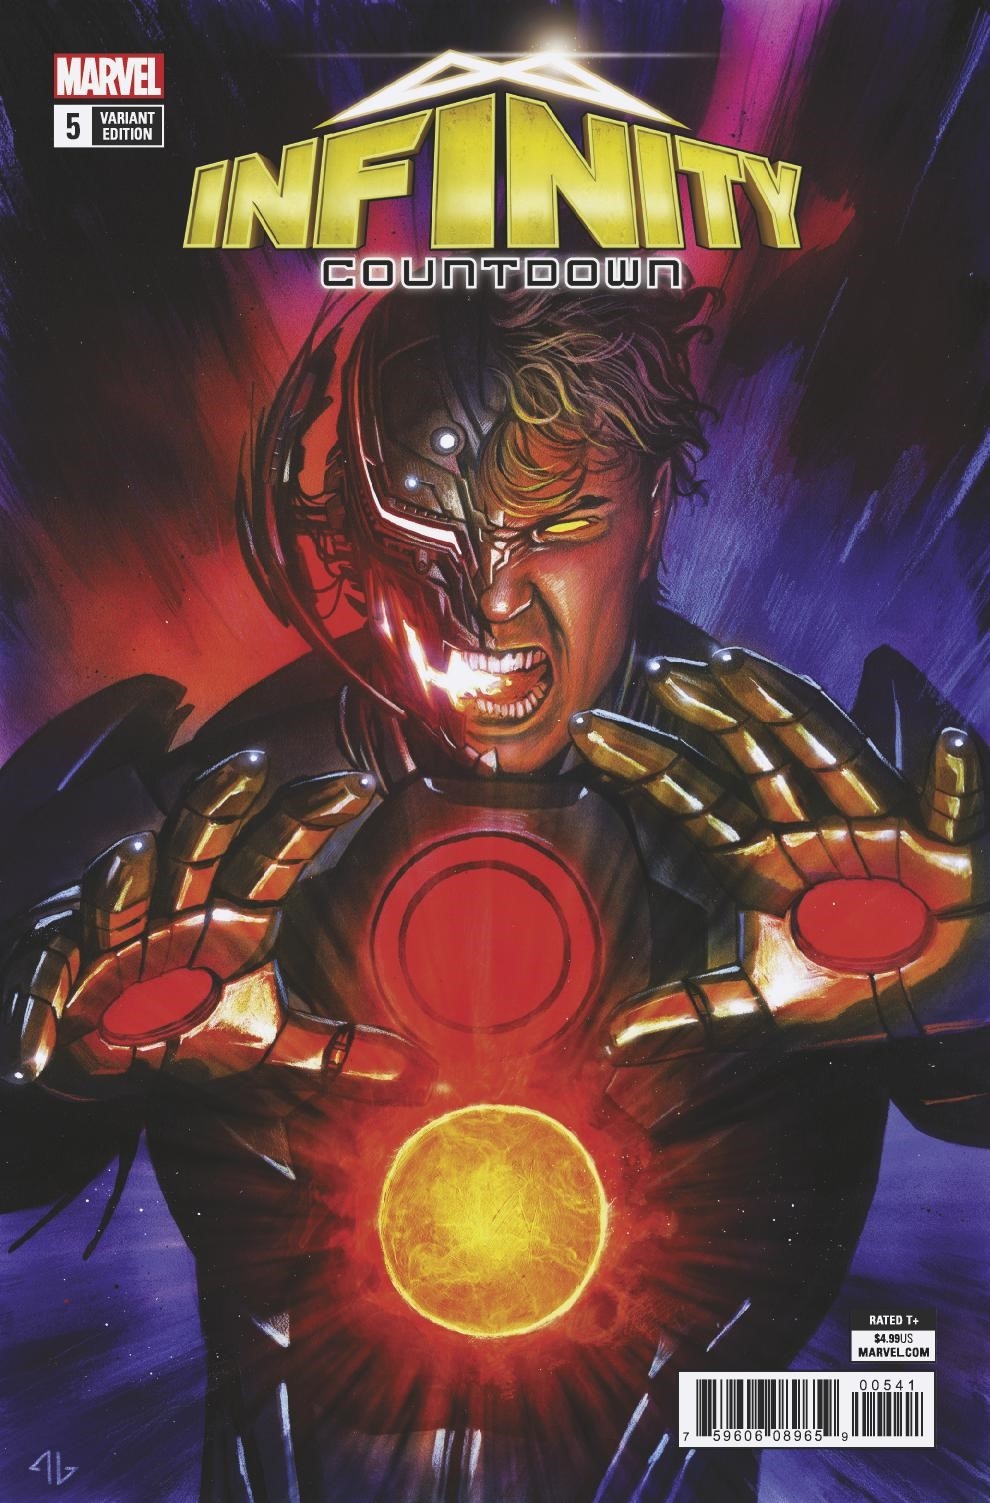 INFINITY COUNTDOWN #5 (OF 5) ULTRON HOLDS INFINITY VAR